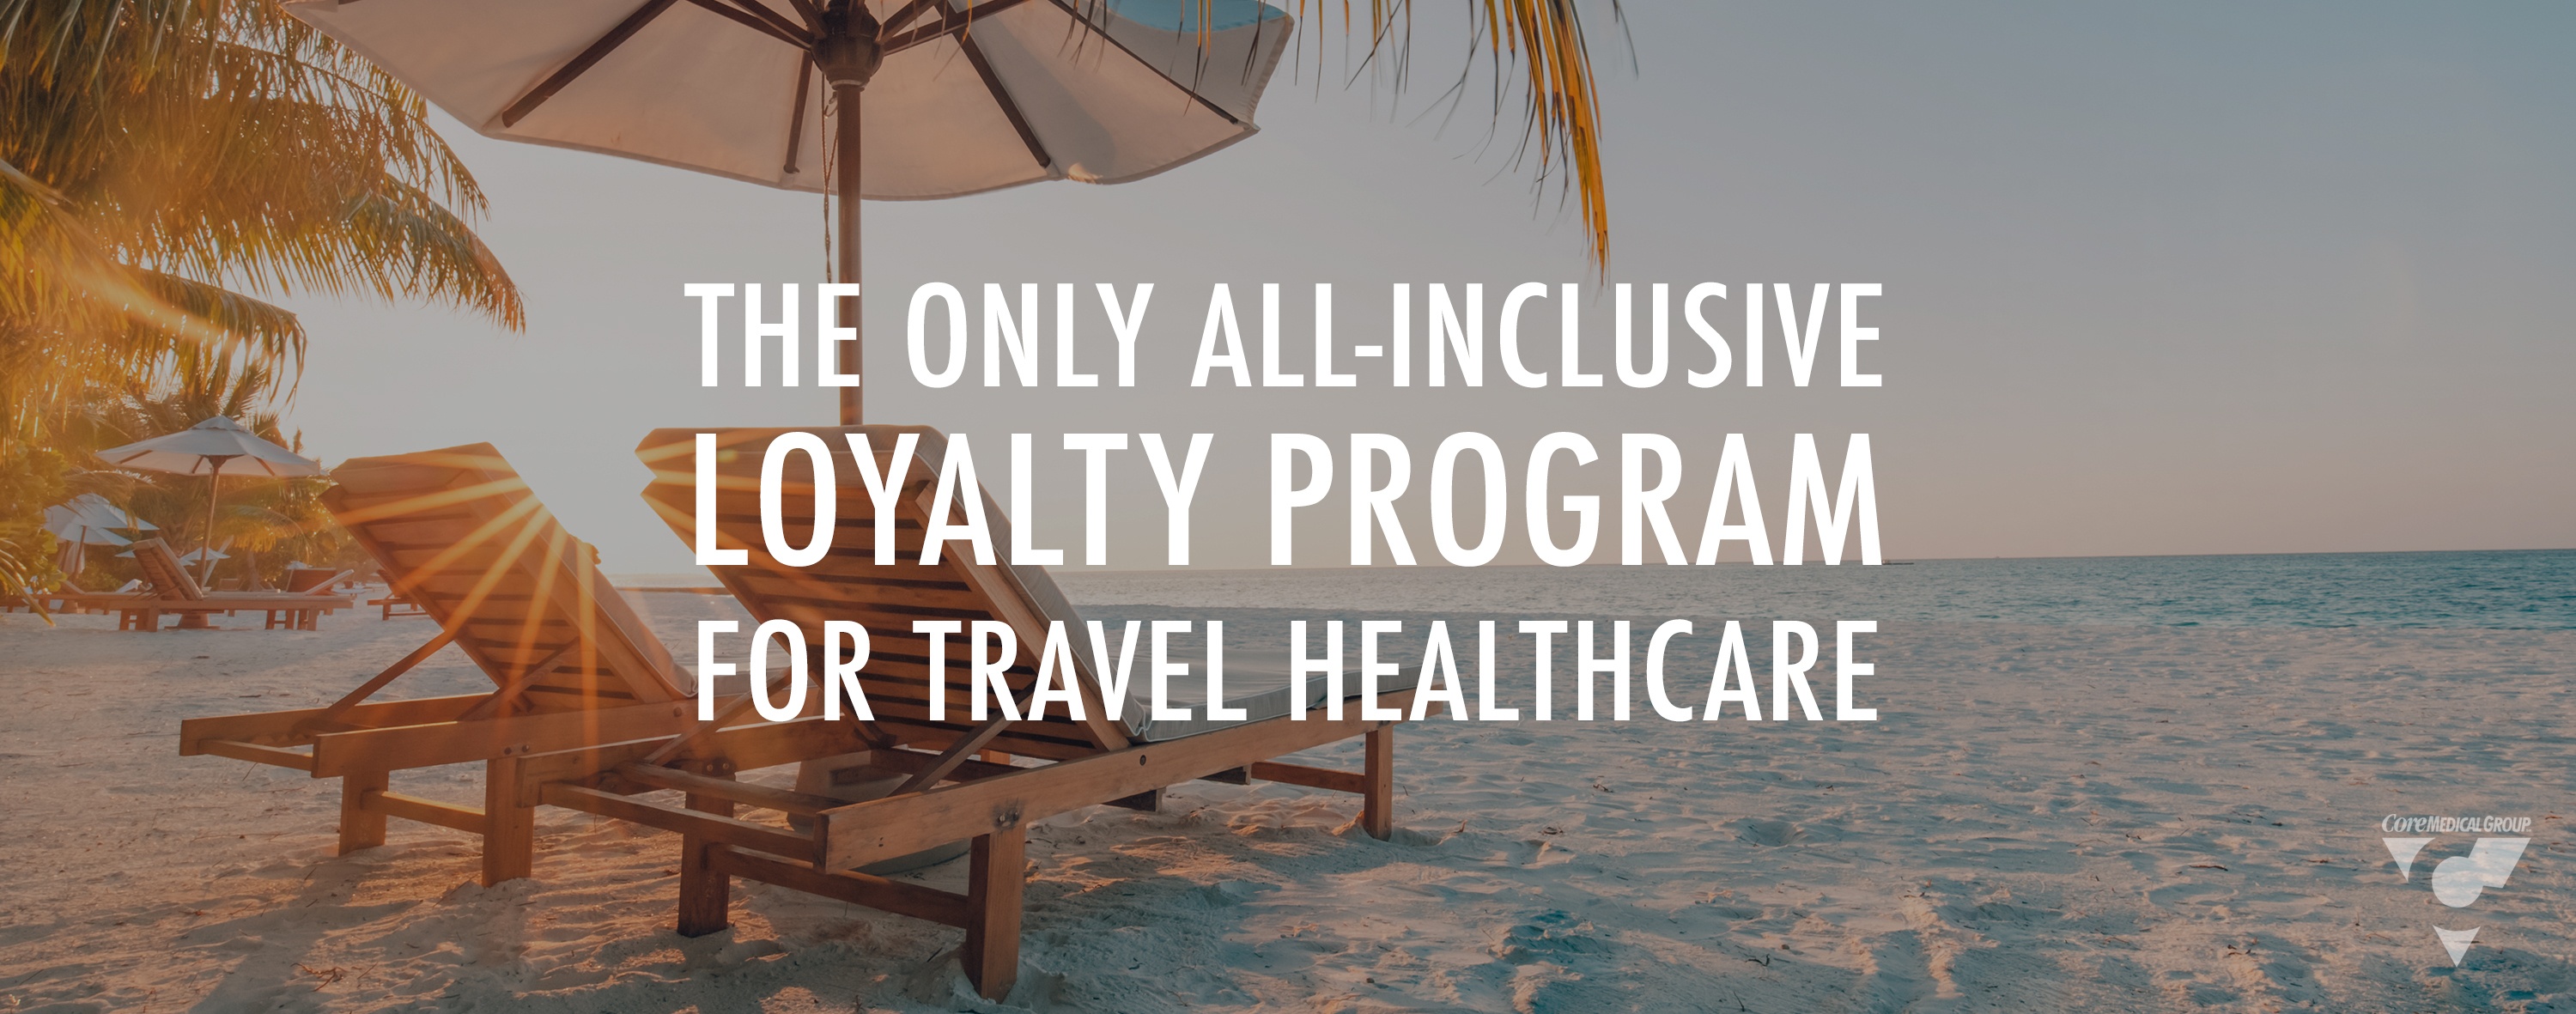 the only all inclusive loyalty program for travel healthcare